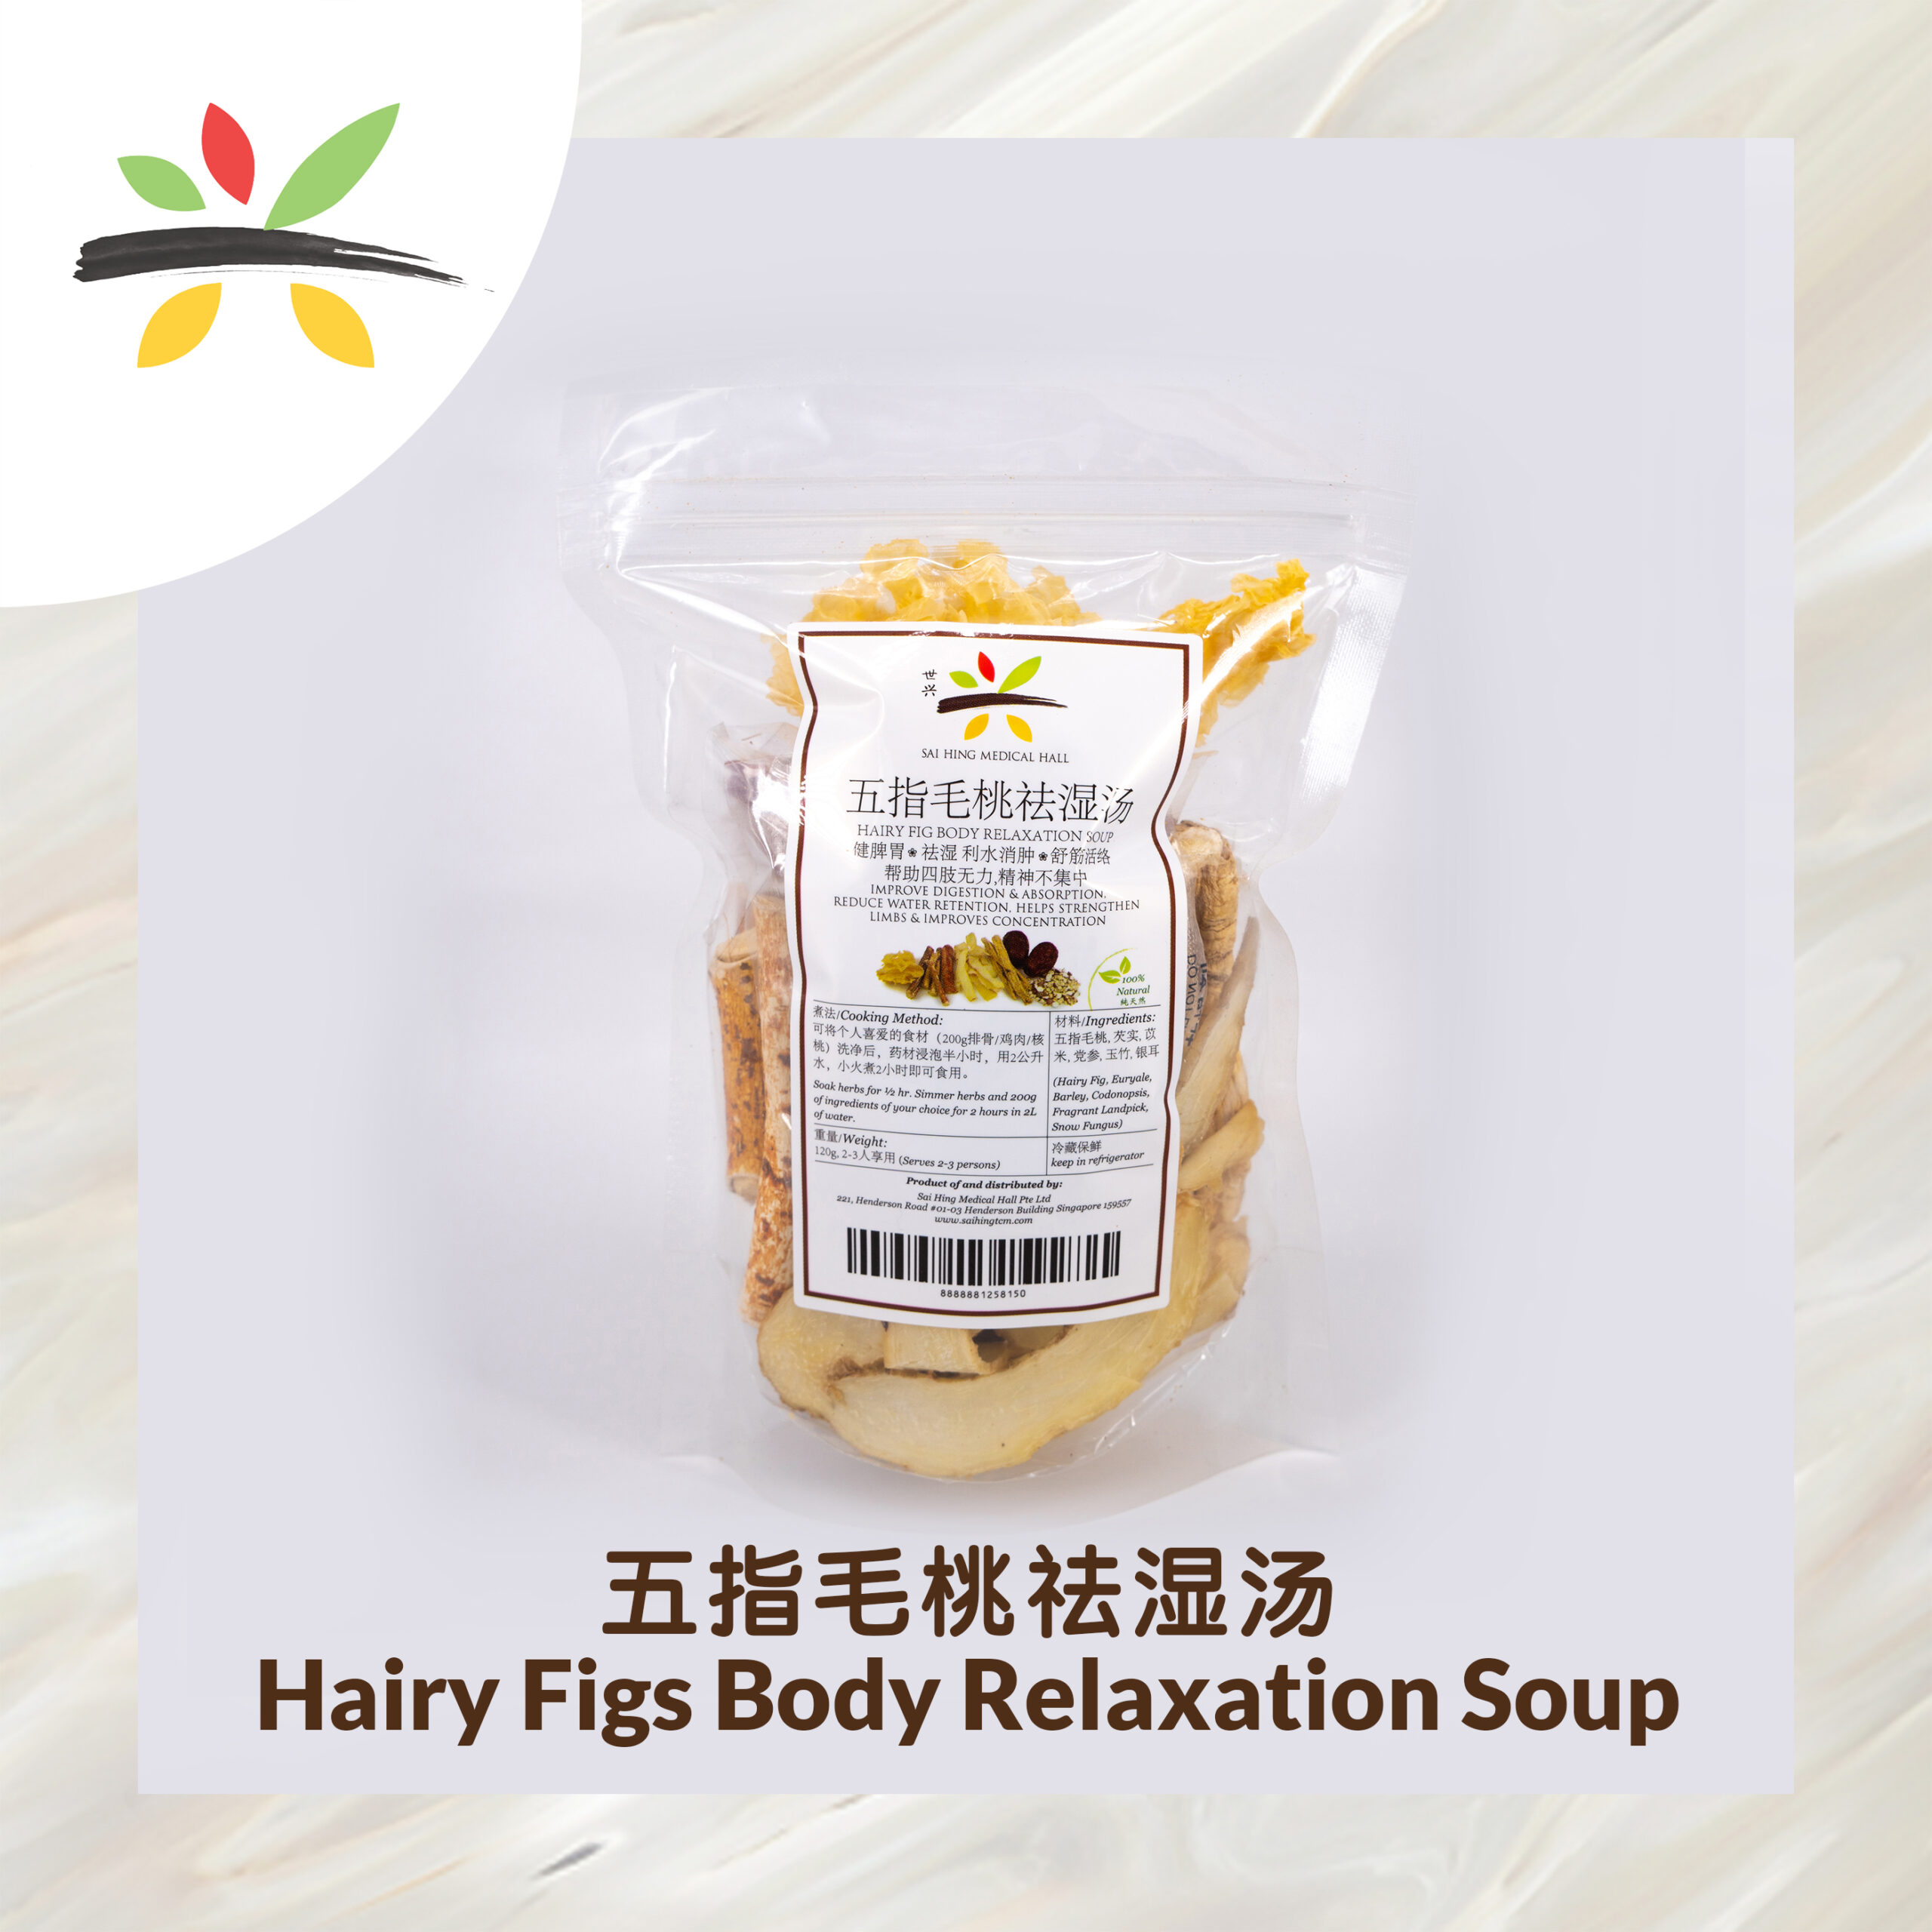 Hairy Fig Body Relaxation Soup 五指毛桃祛湿汤 120g For 2 3 Pax Sai Hing Medical Hall 